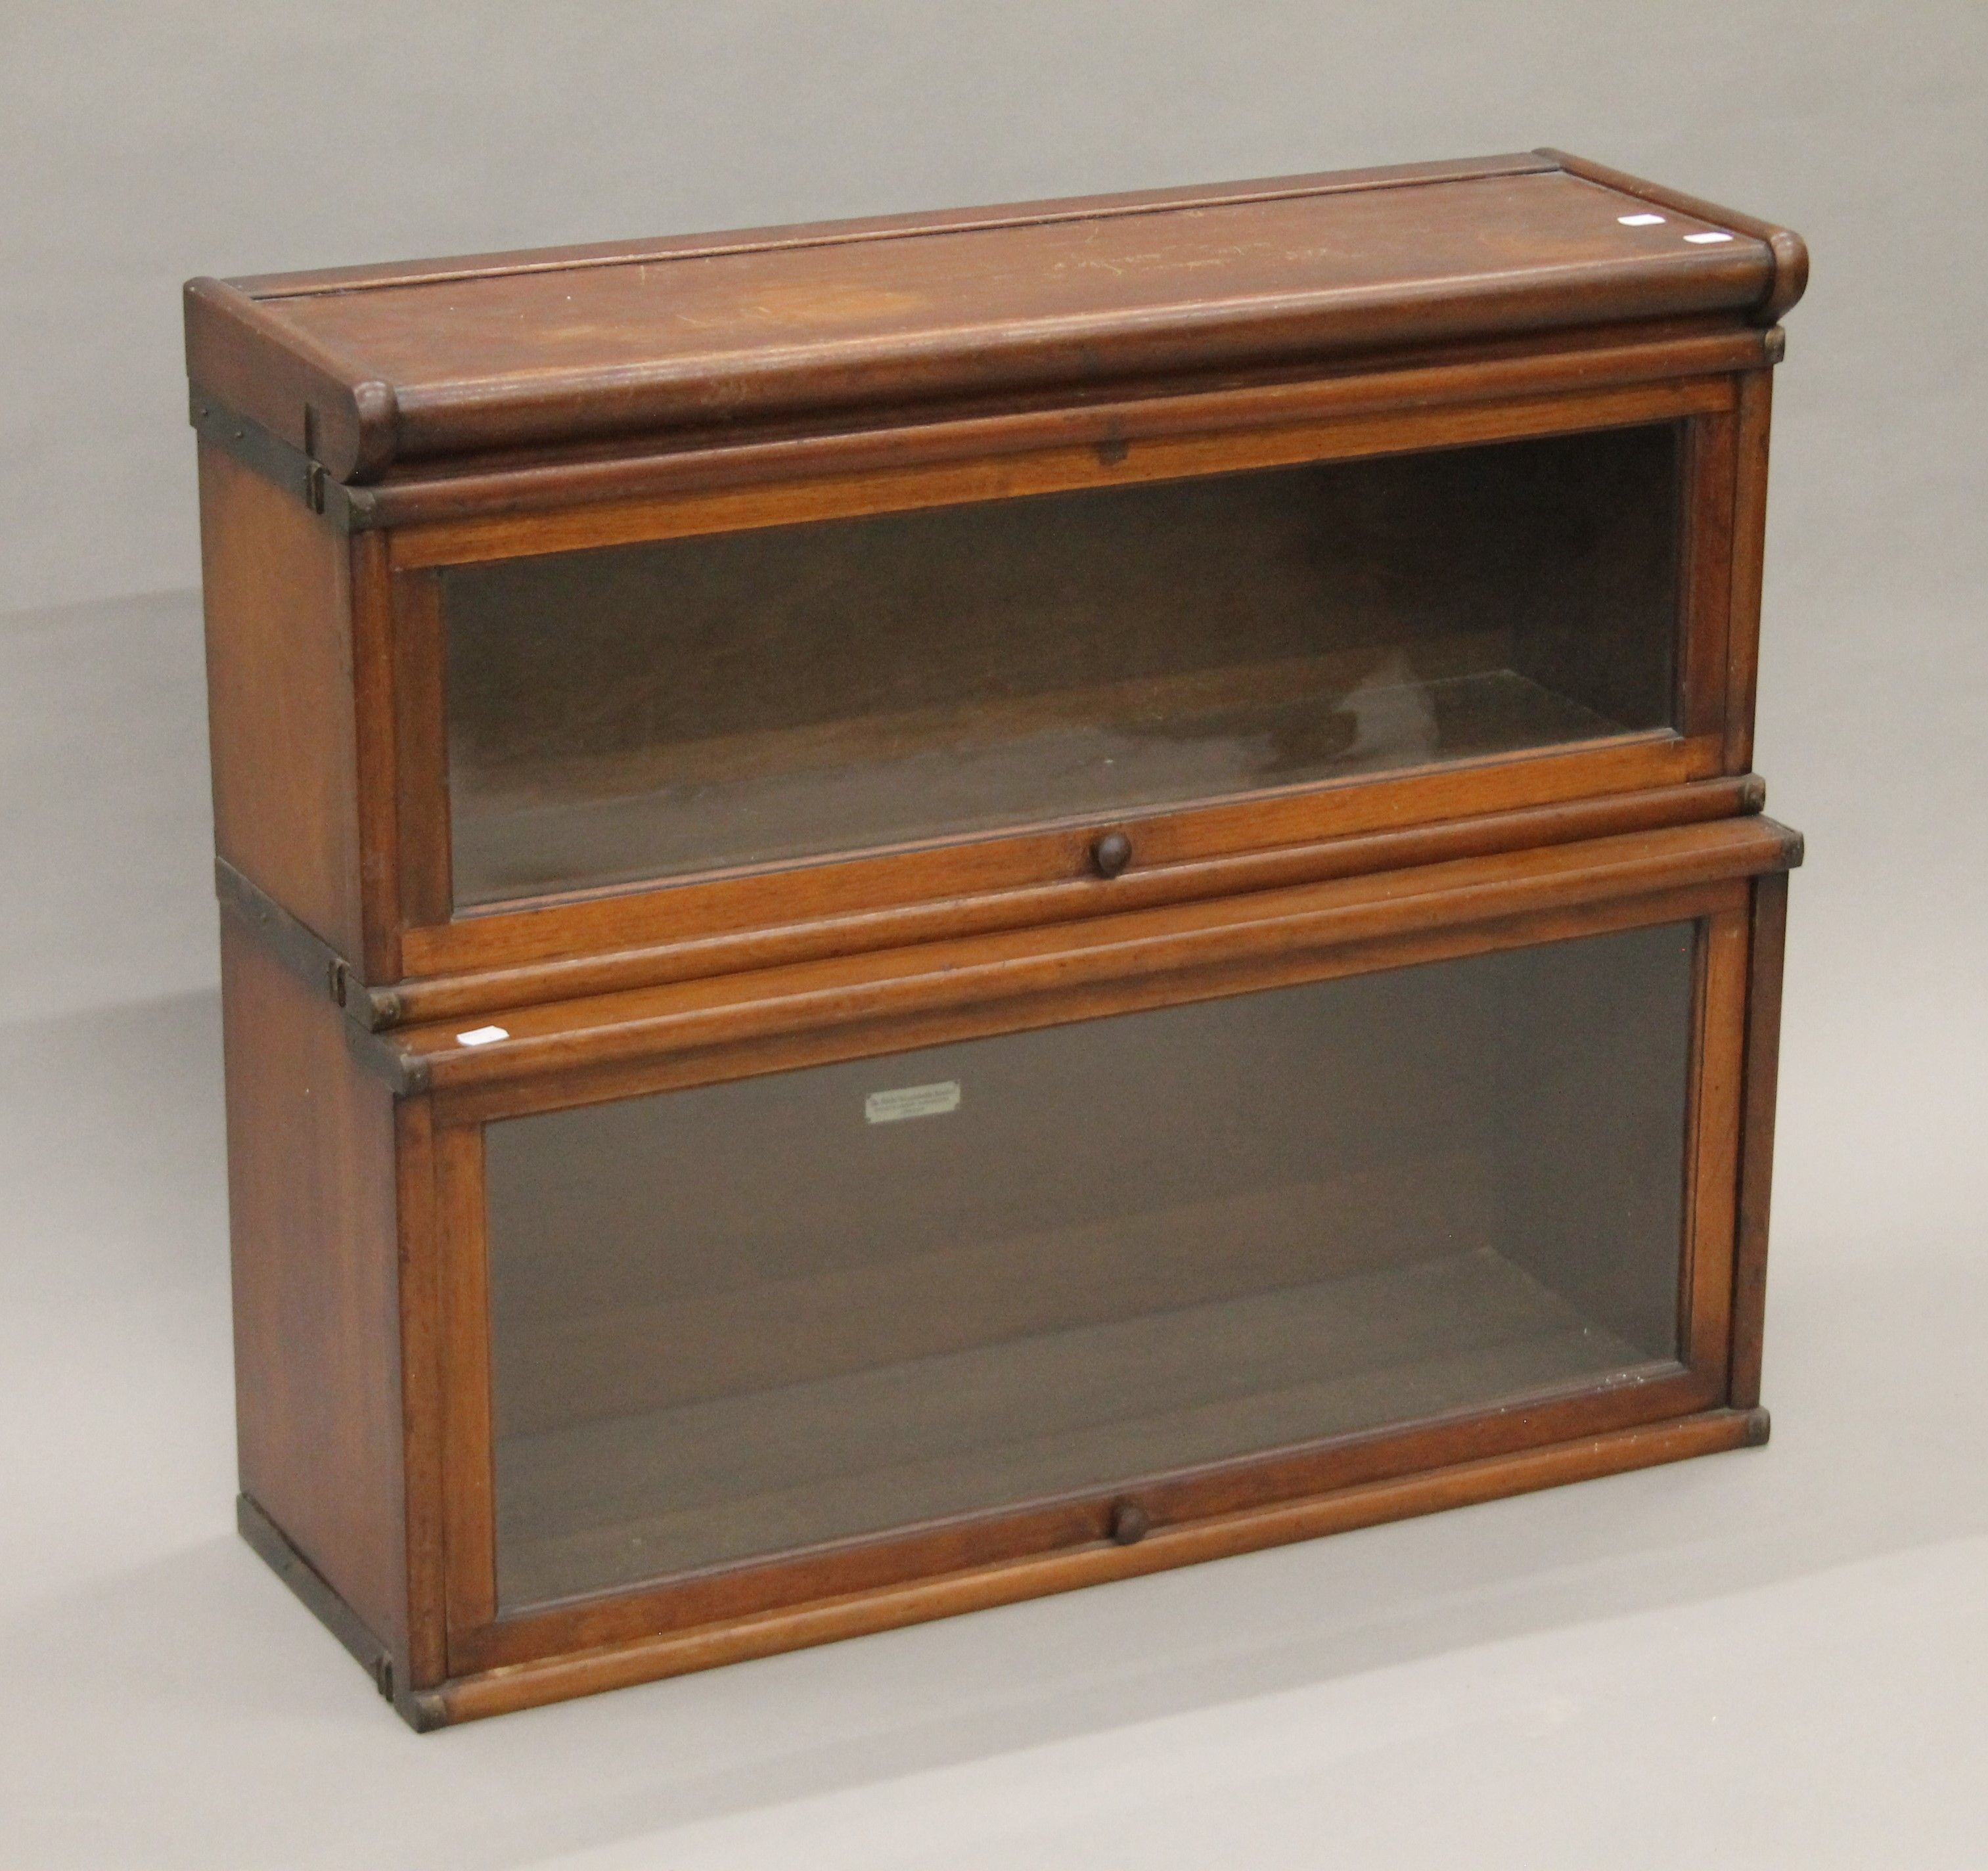 A two-stack mahogany Globe Wernicke bookcase. 86 cm wide, 73 cm high, 29 cm deep. - Image 2 of 7